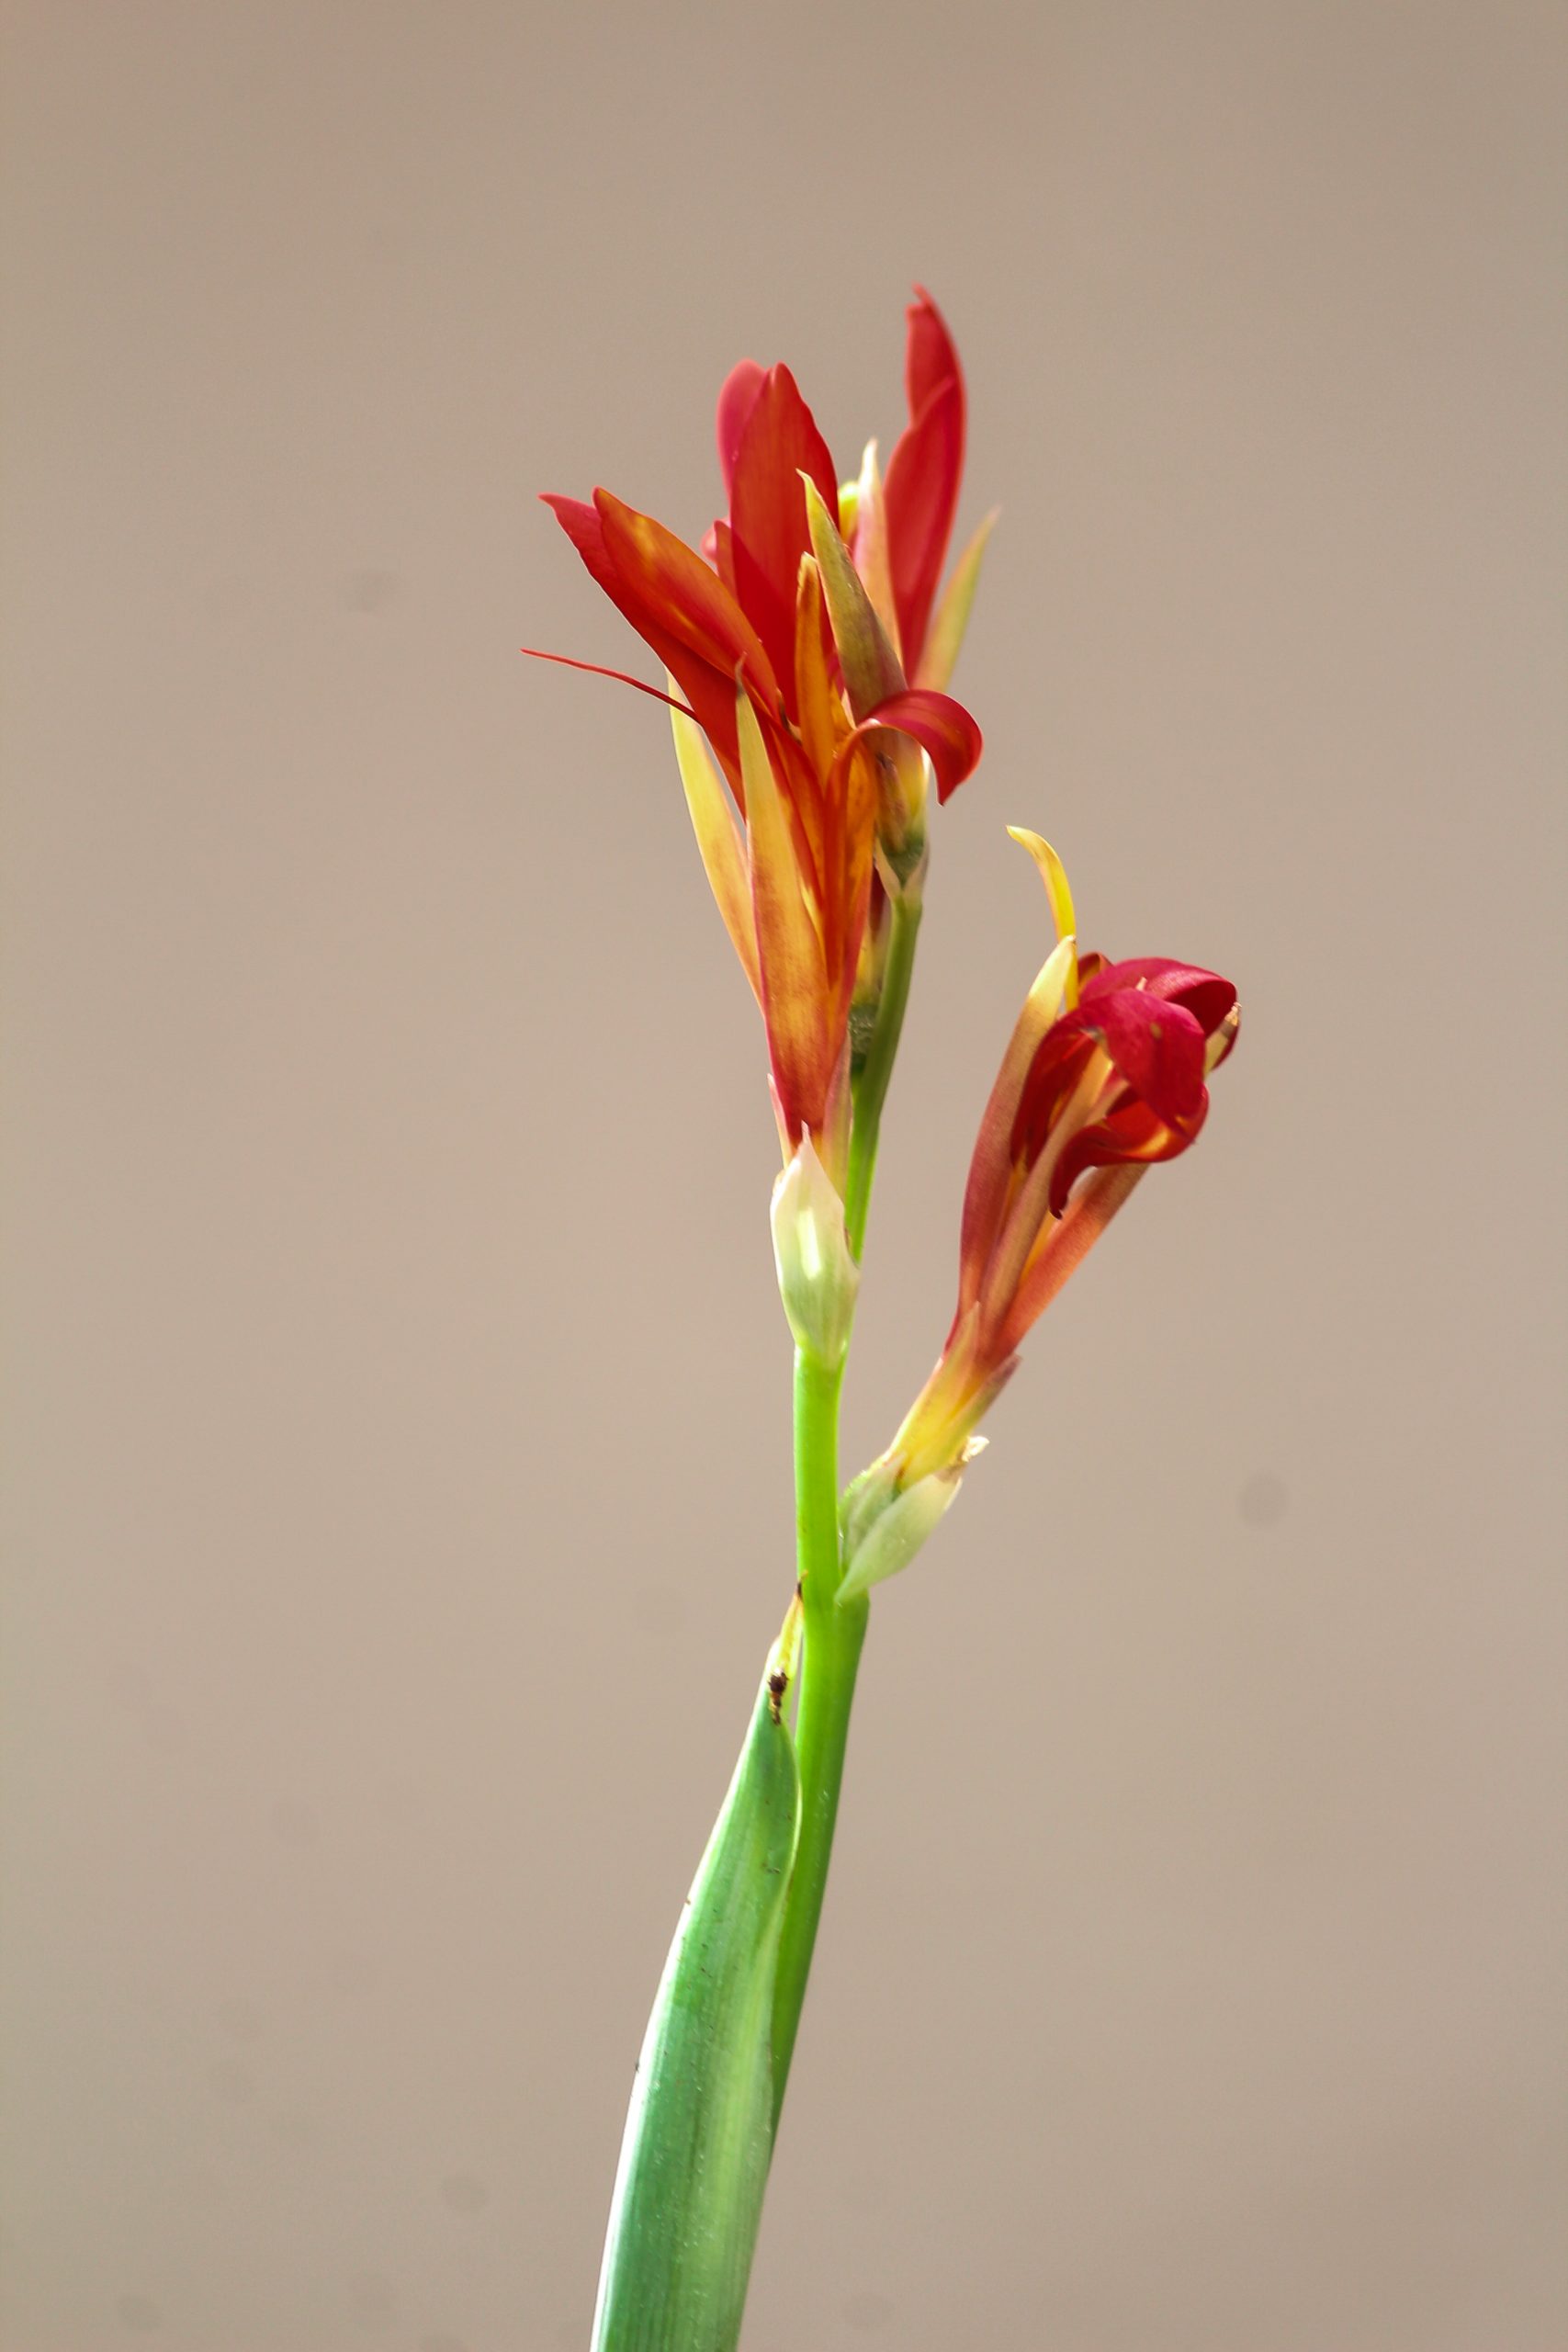 Red Canna Flowers on Focus